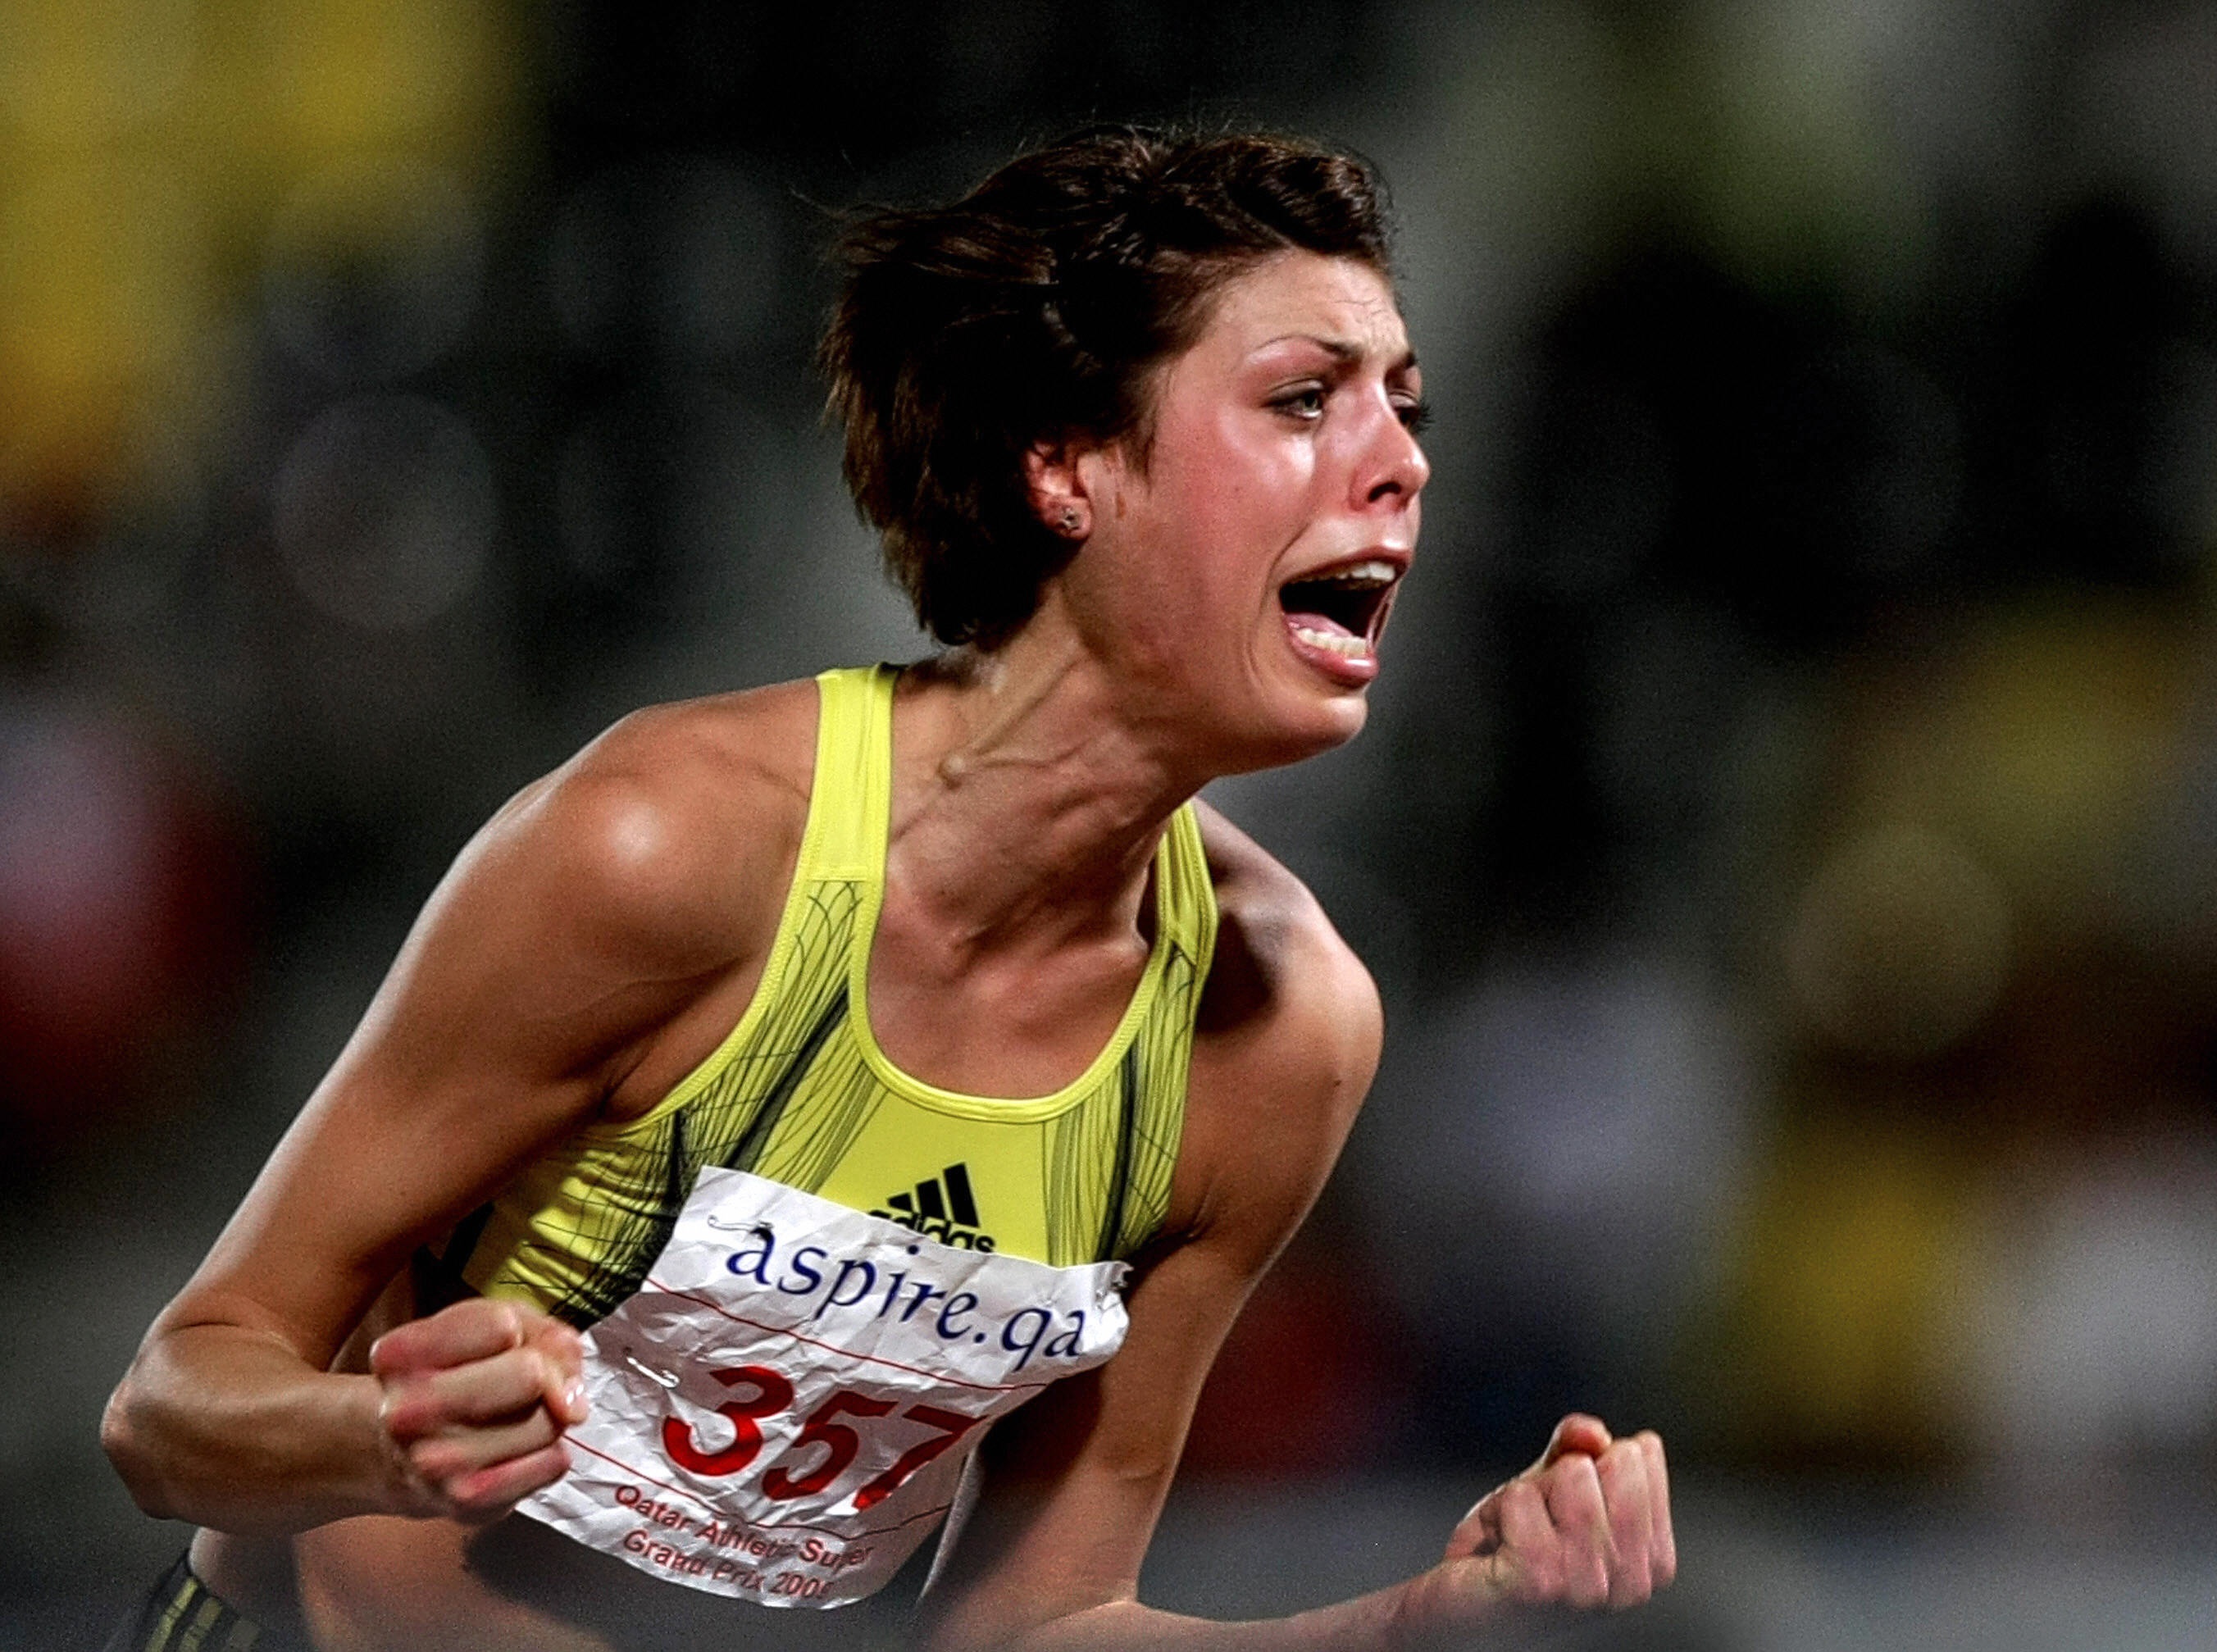 MARWAN NAAMANI/AFP/Getty Images. Blanka Vlasic of Croatia screams after clearing 2.05m to win the high jump competition at the Qatar Super Grand Prix in Doha on May 08, 2009. Vlasic clinched a new tournament record but failed to break her own personal best of 2.07m or set a new world record of 2.10m.